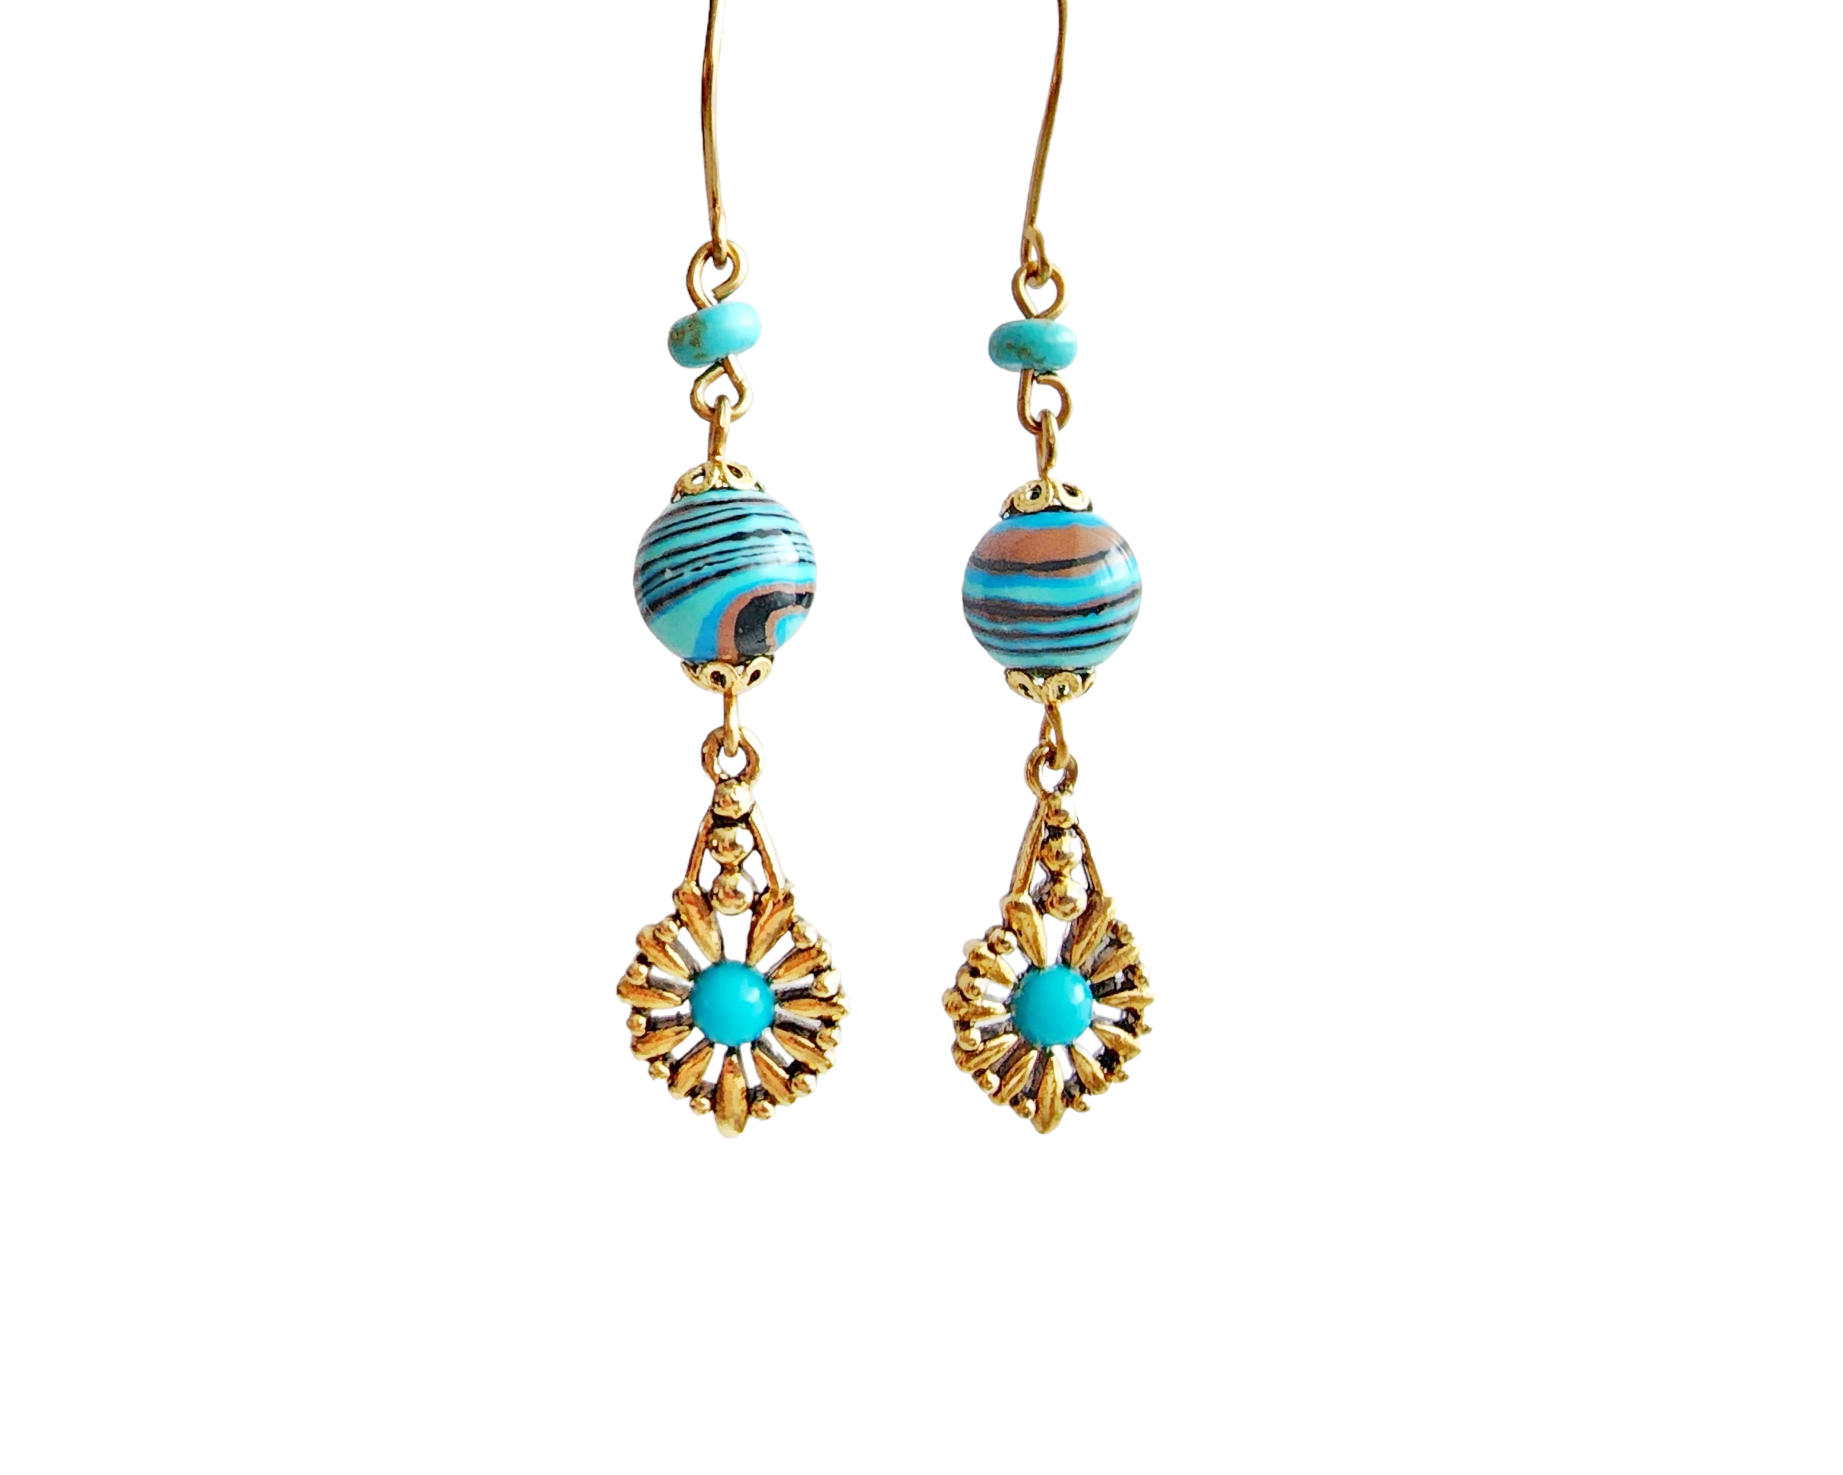 Long Eco Turquoise Golden Earrings, turquoise malachite, gold plated, turquoise and French earrings wires on white background.